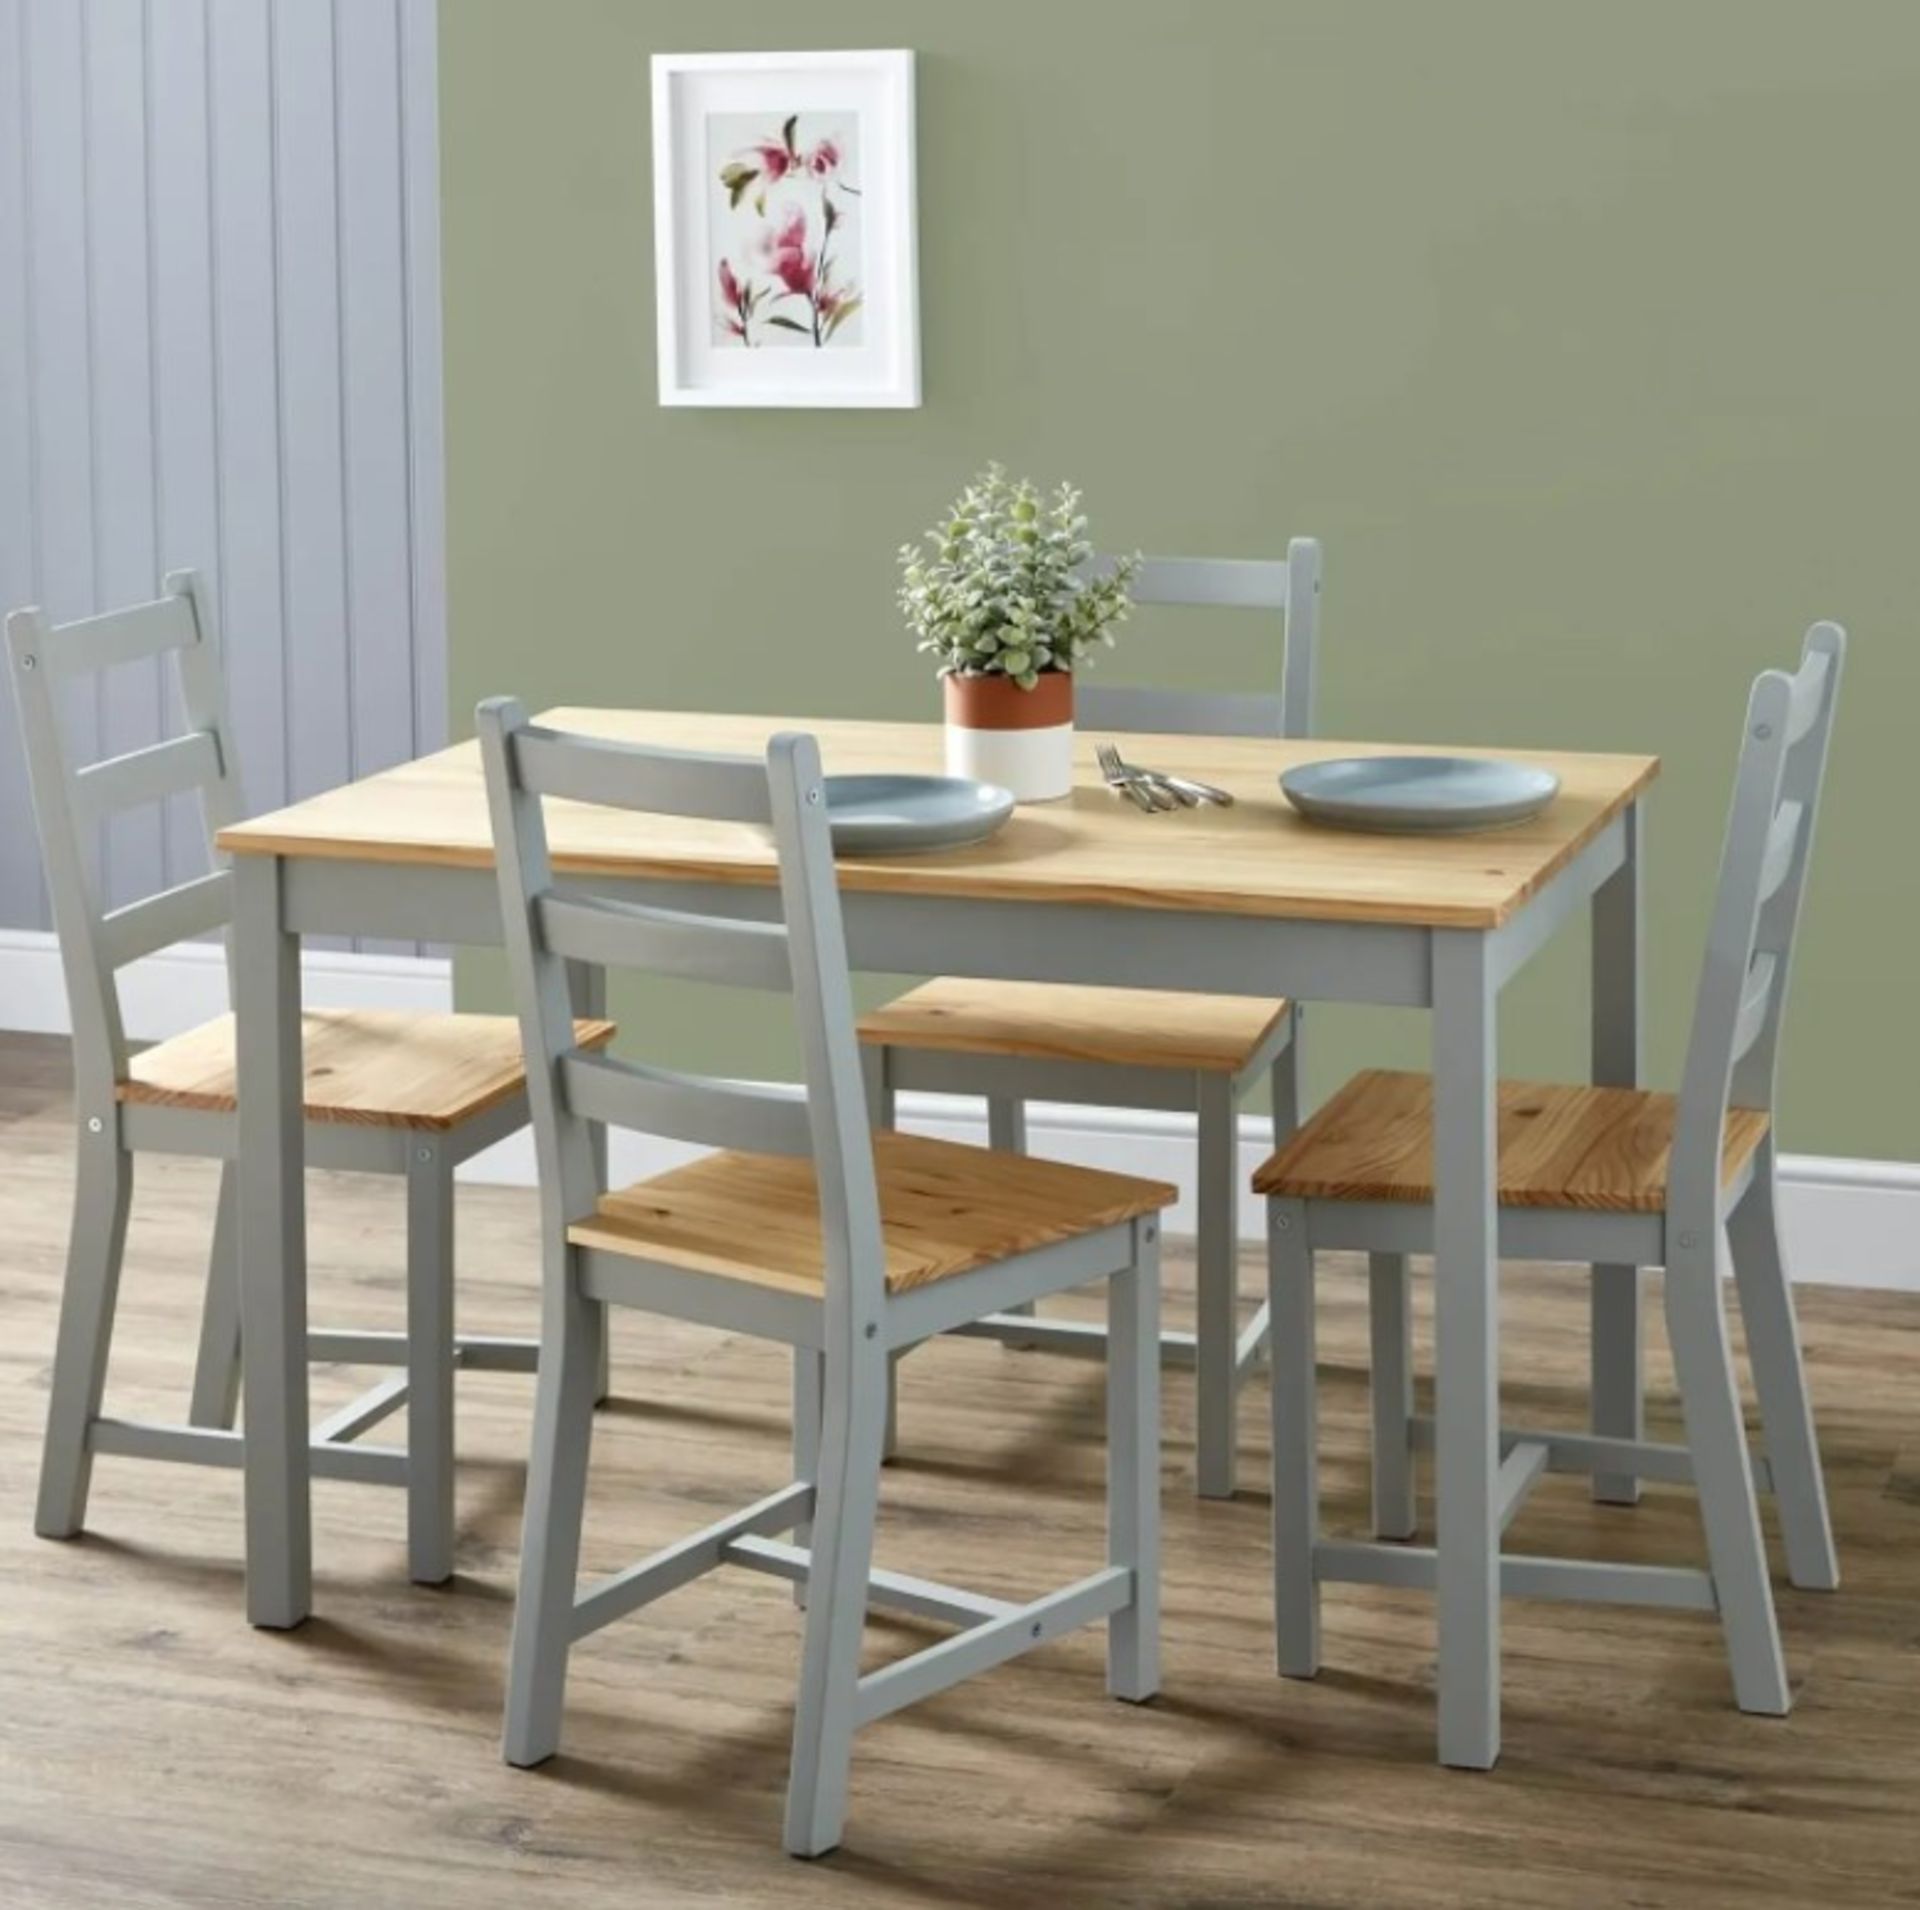 (8A) 1x Mortimer Pine Dining Set With 4 Chairs RRP £200. Pine Table Top. Table: (H)73 x (W)75 x (L) - Image 2 of 3